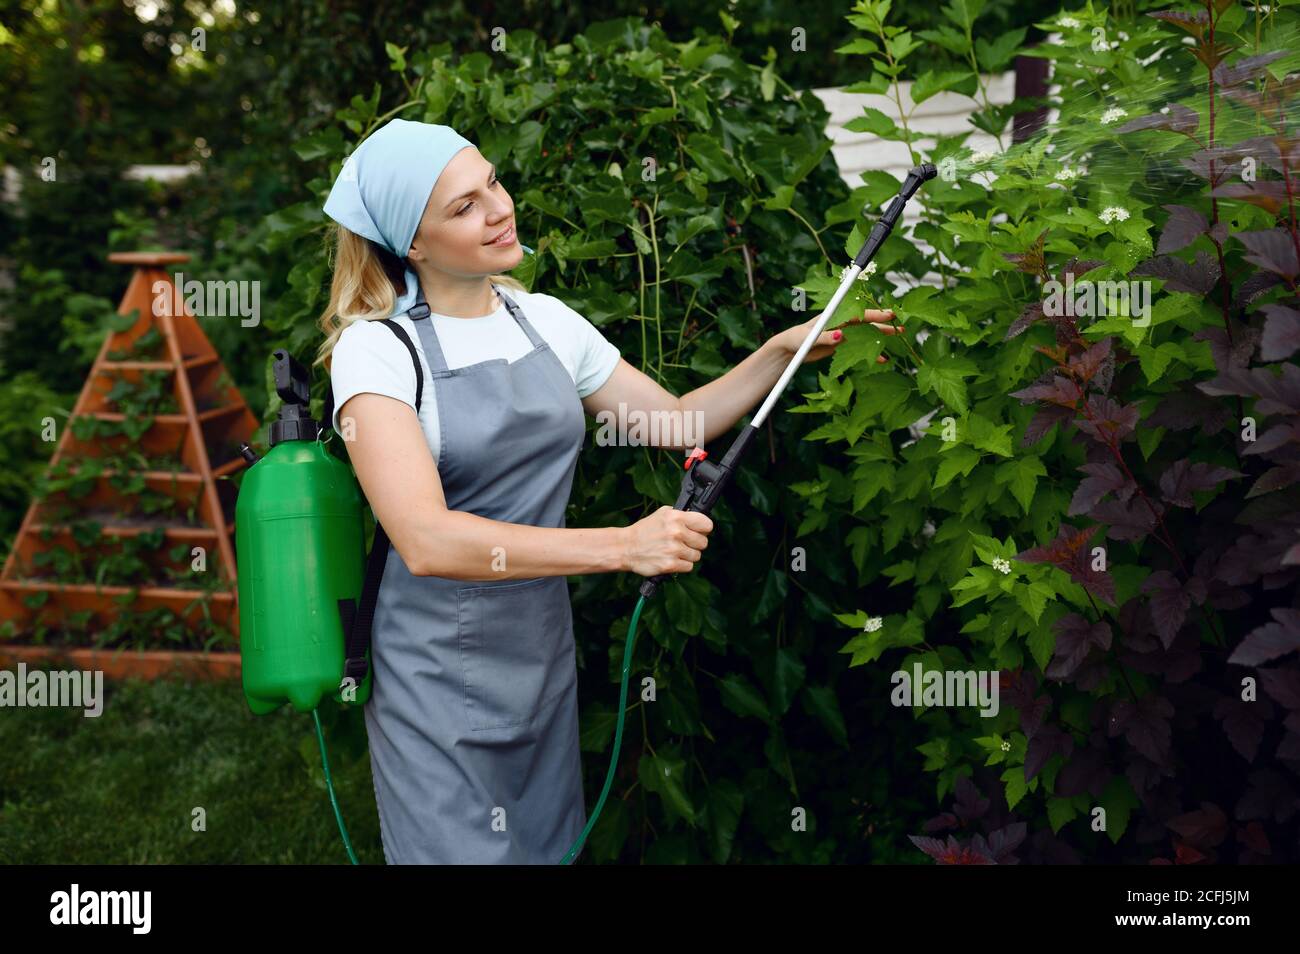 Woman in apron watering flowers in the garden Stock Photo